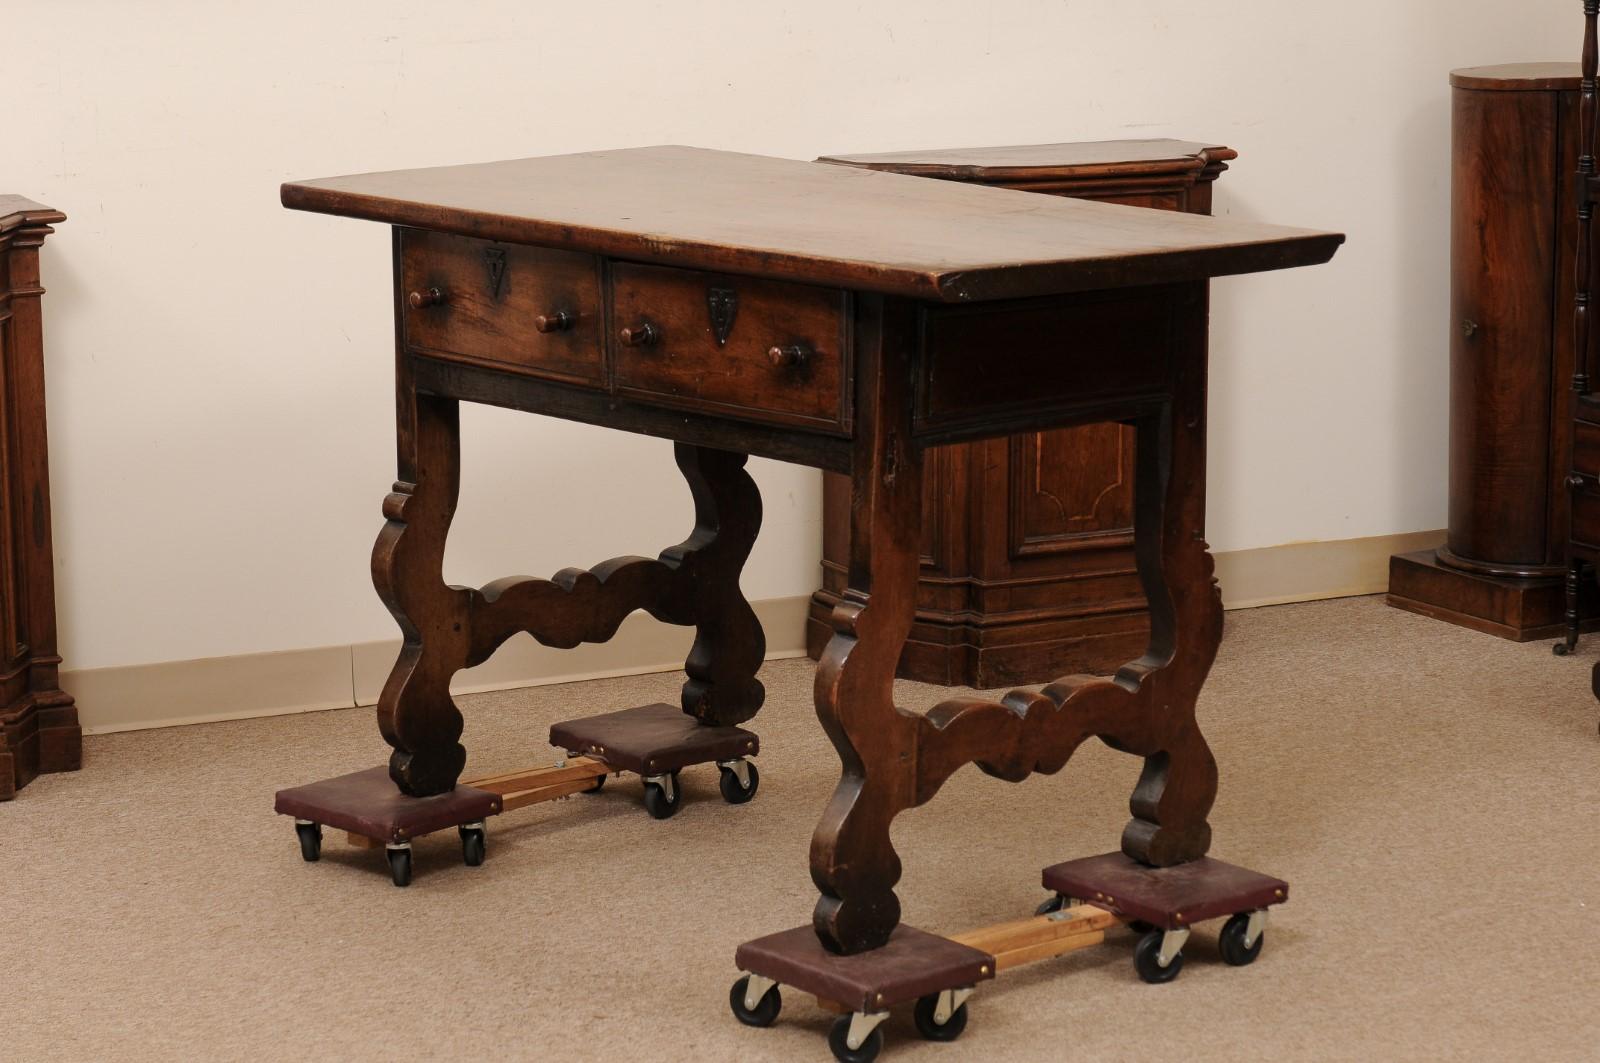 Spanish Walnut Console Table with 2 Drawers and Lyre Legs, Early 18th Century For Sale 10